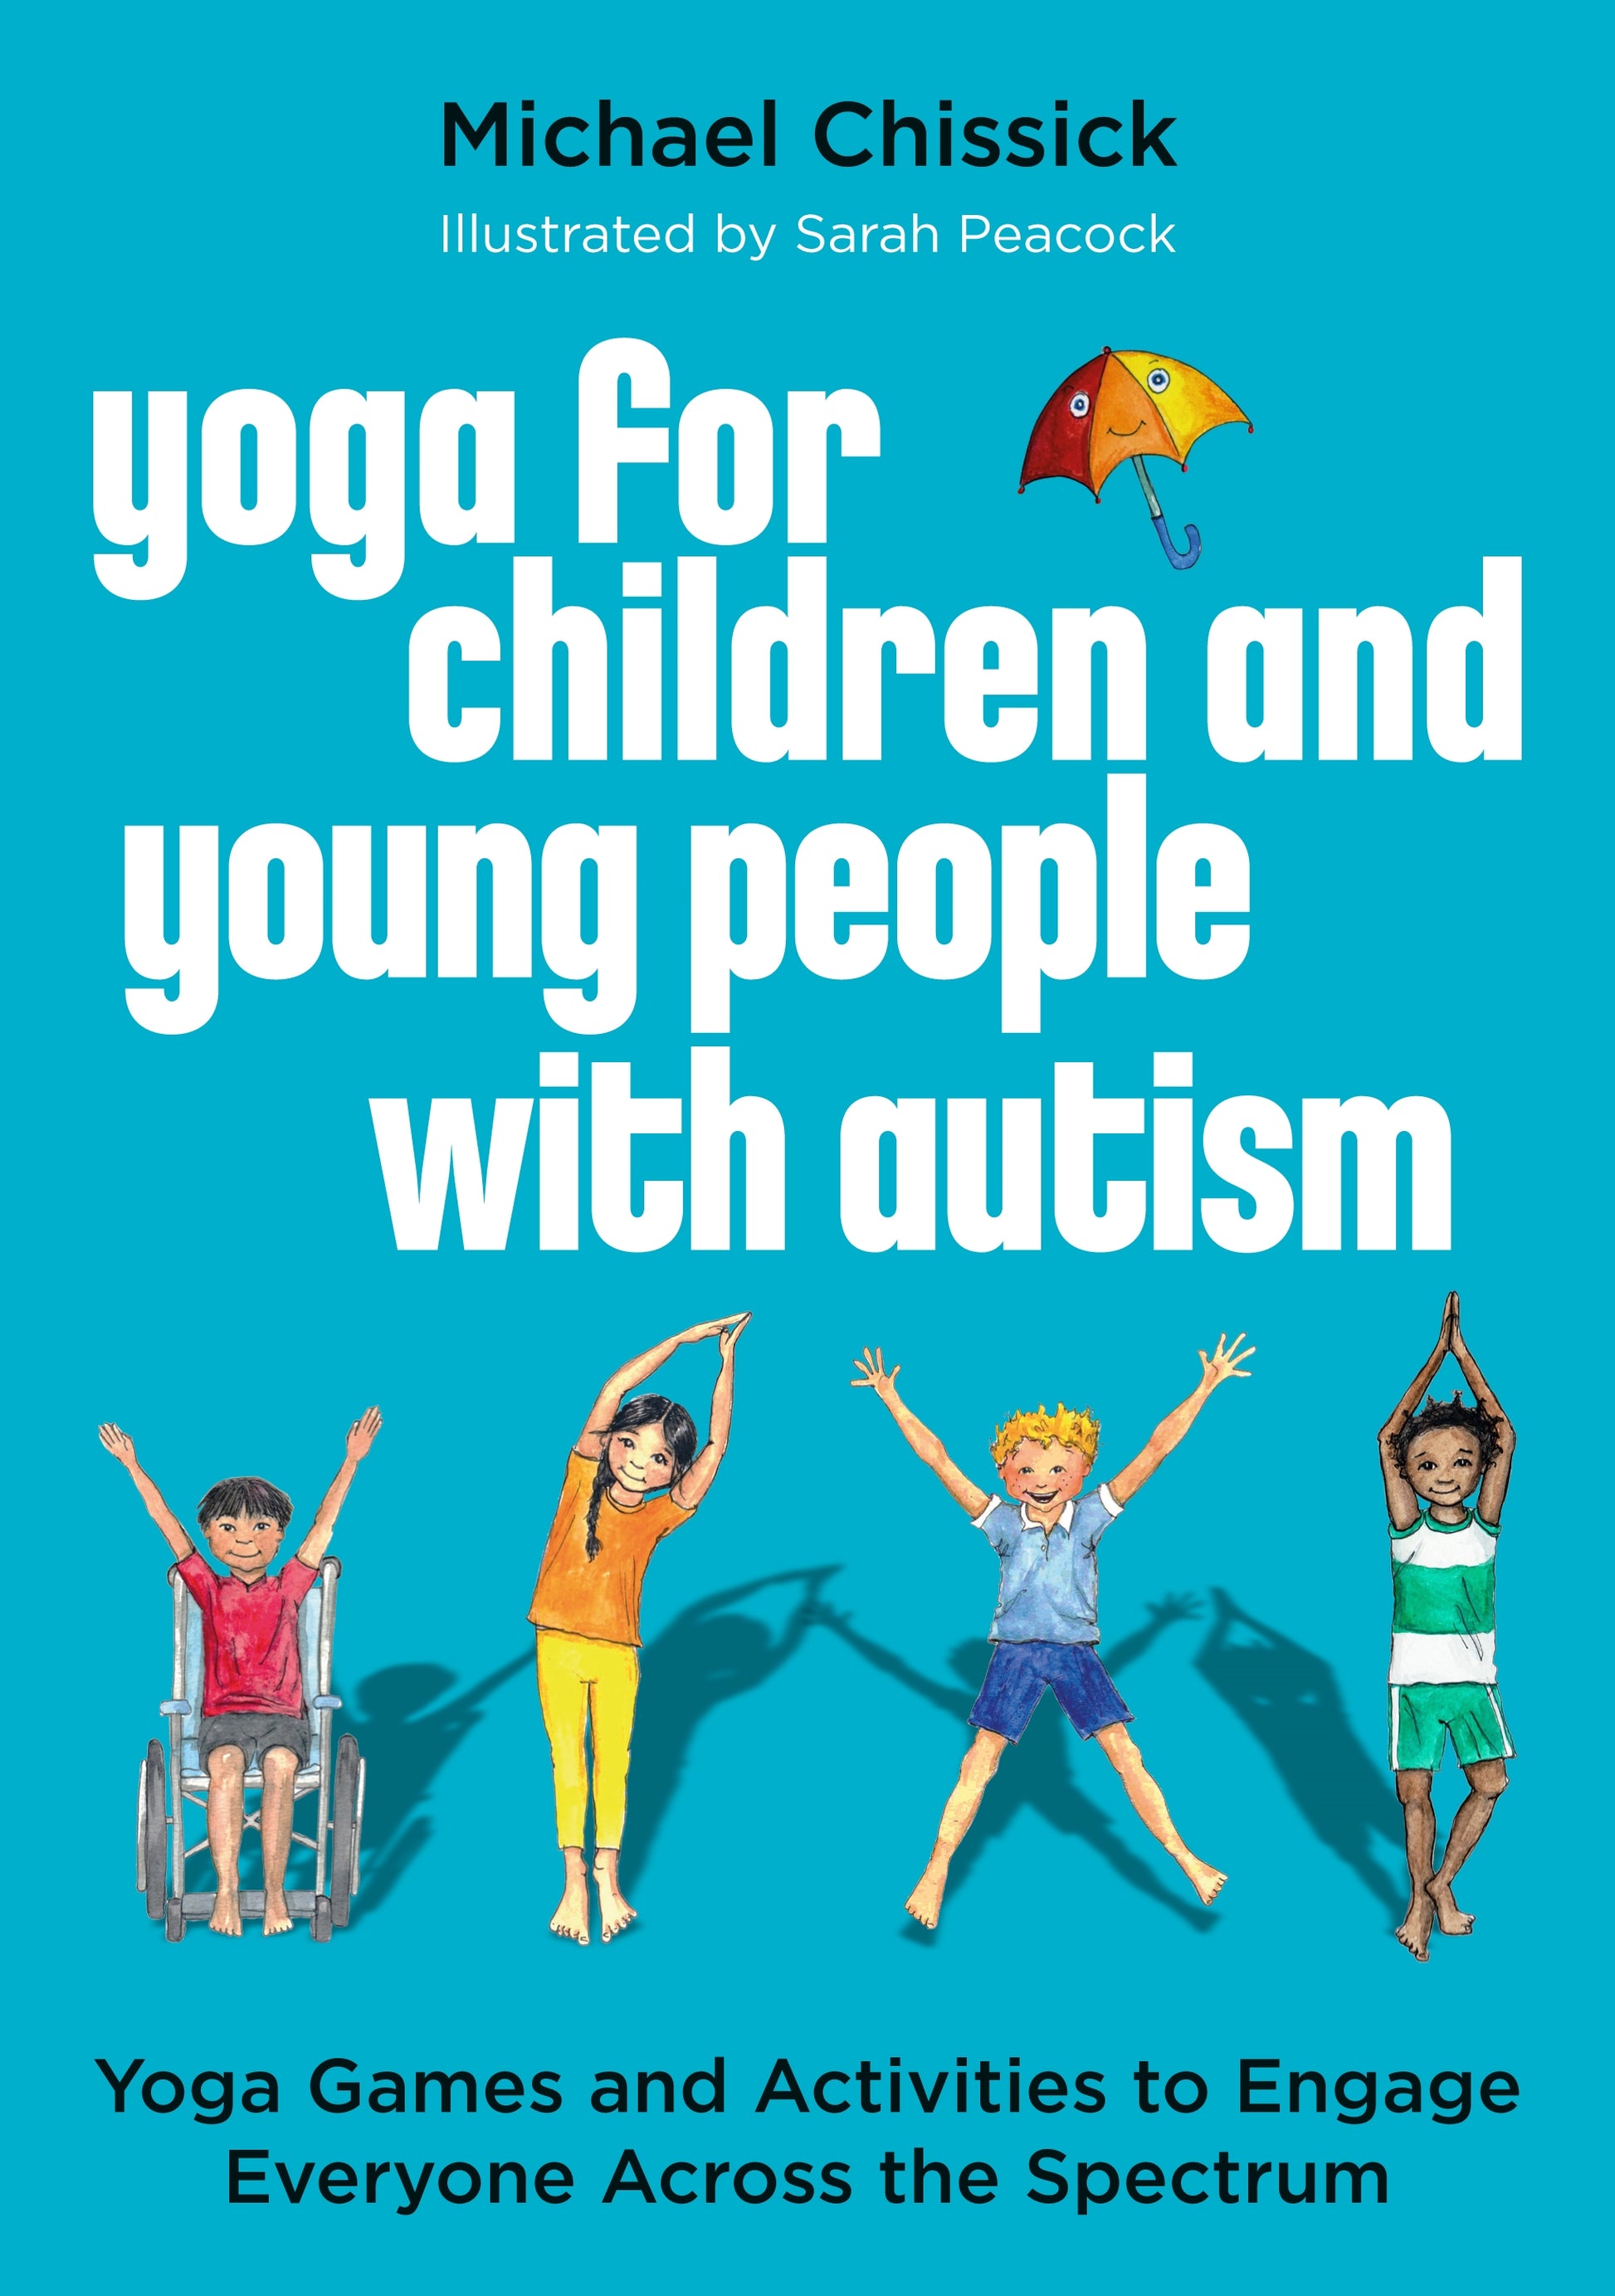 Yoga for Children and Young People with Autism by Sarah Peacock, Michael Chissick